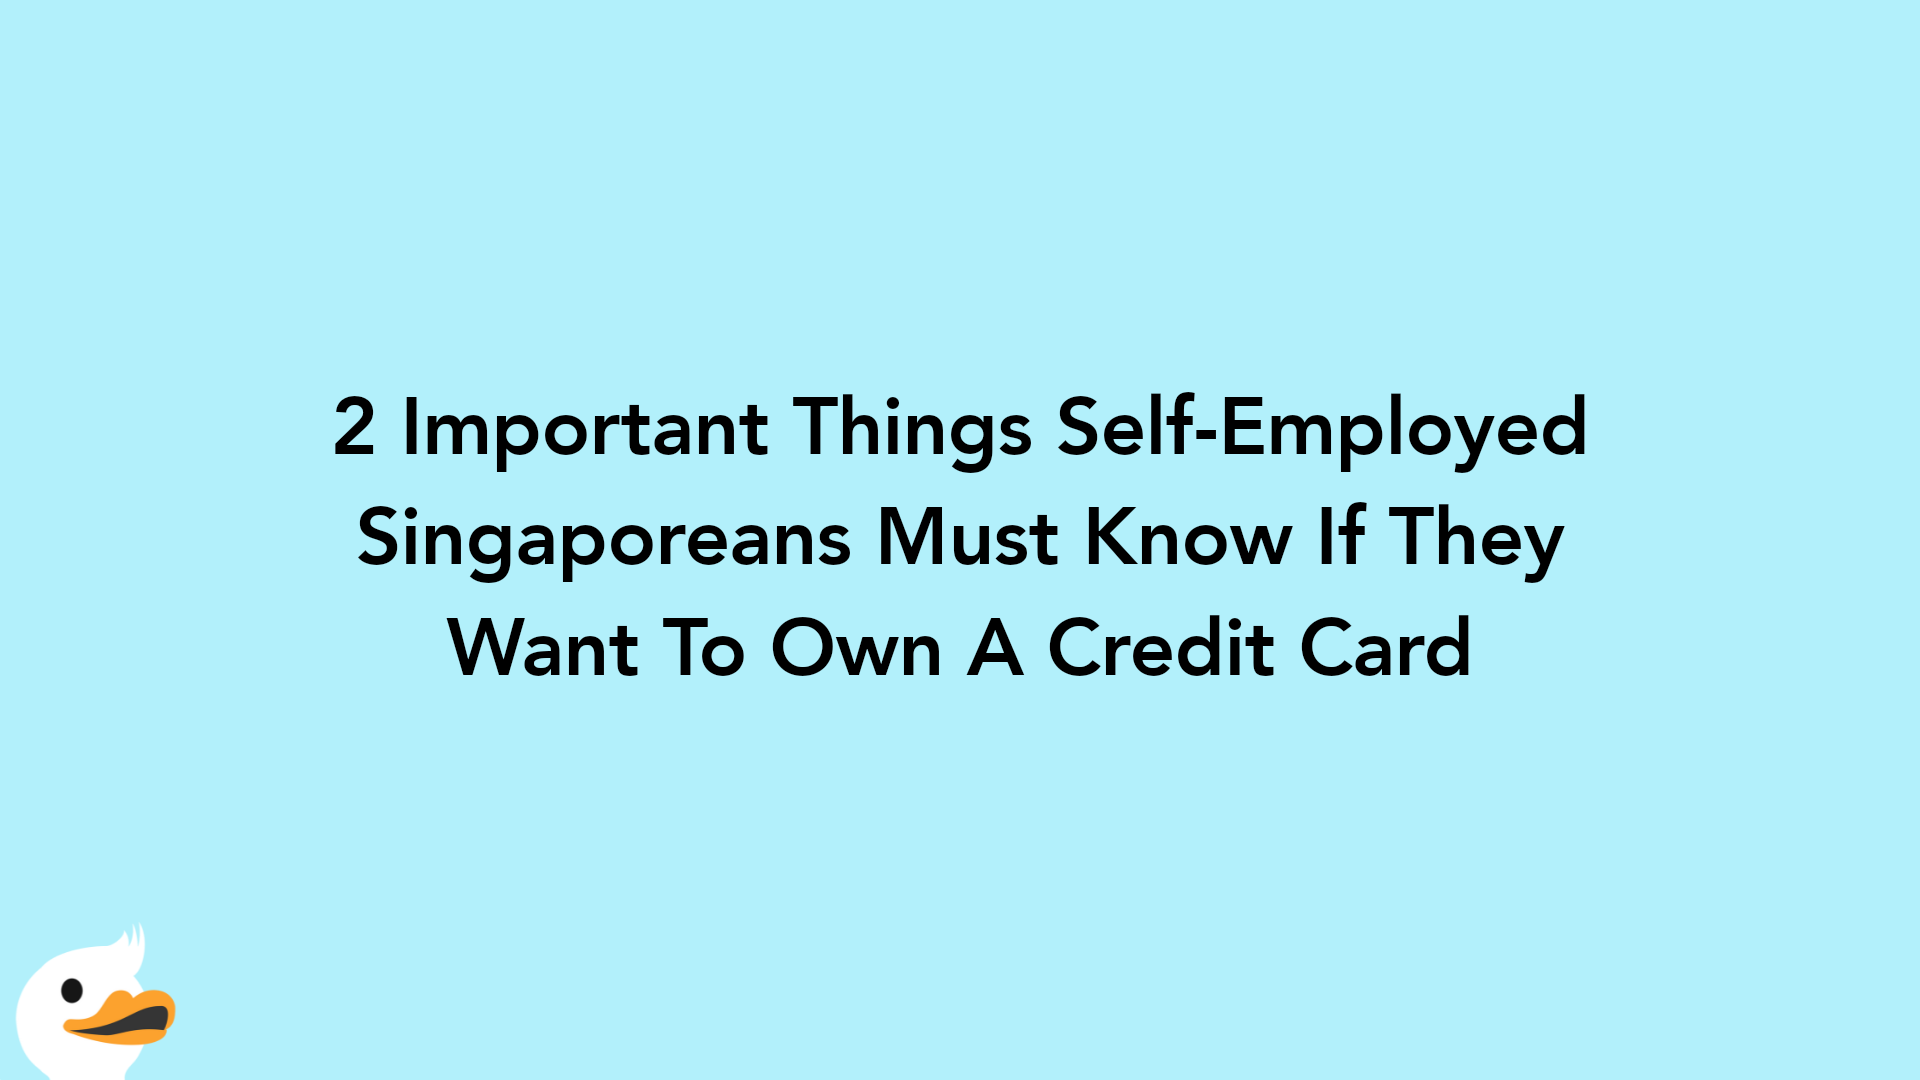 2 Important Things Self-Employed Singaporeans Must Know If They Want To Own A Credit Card